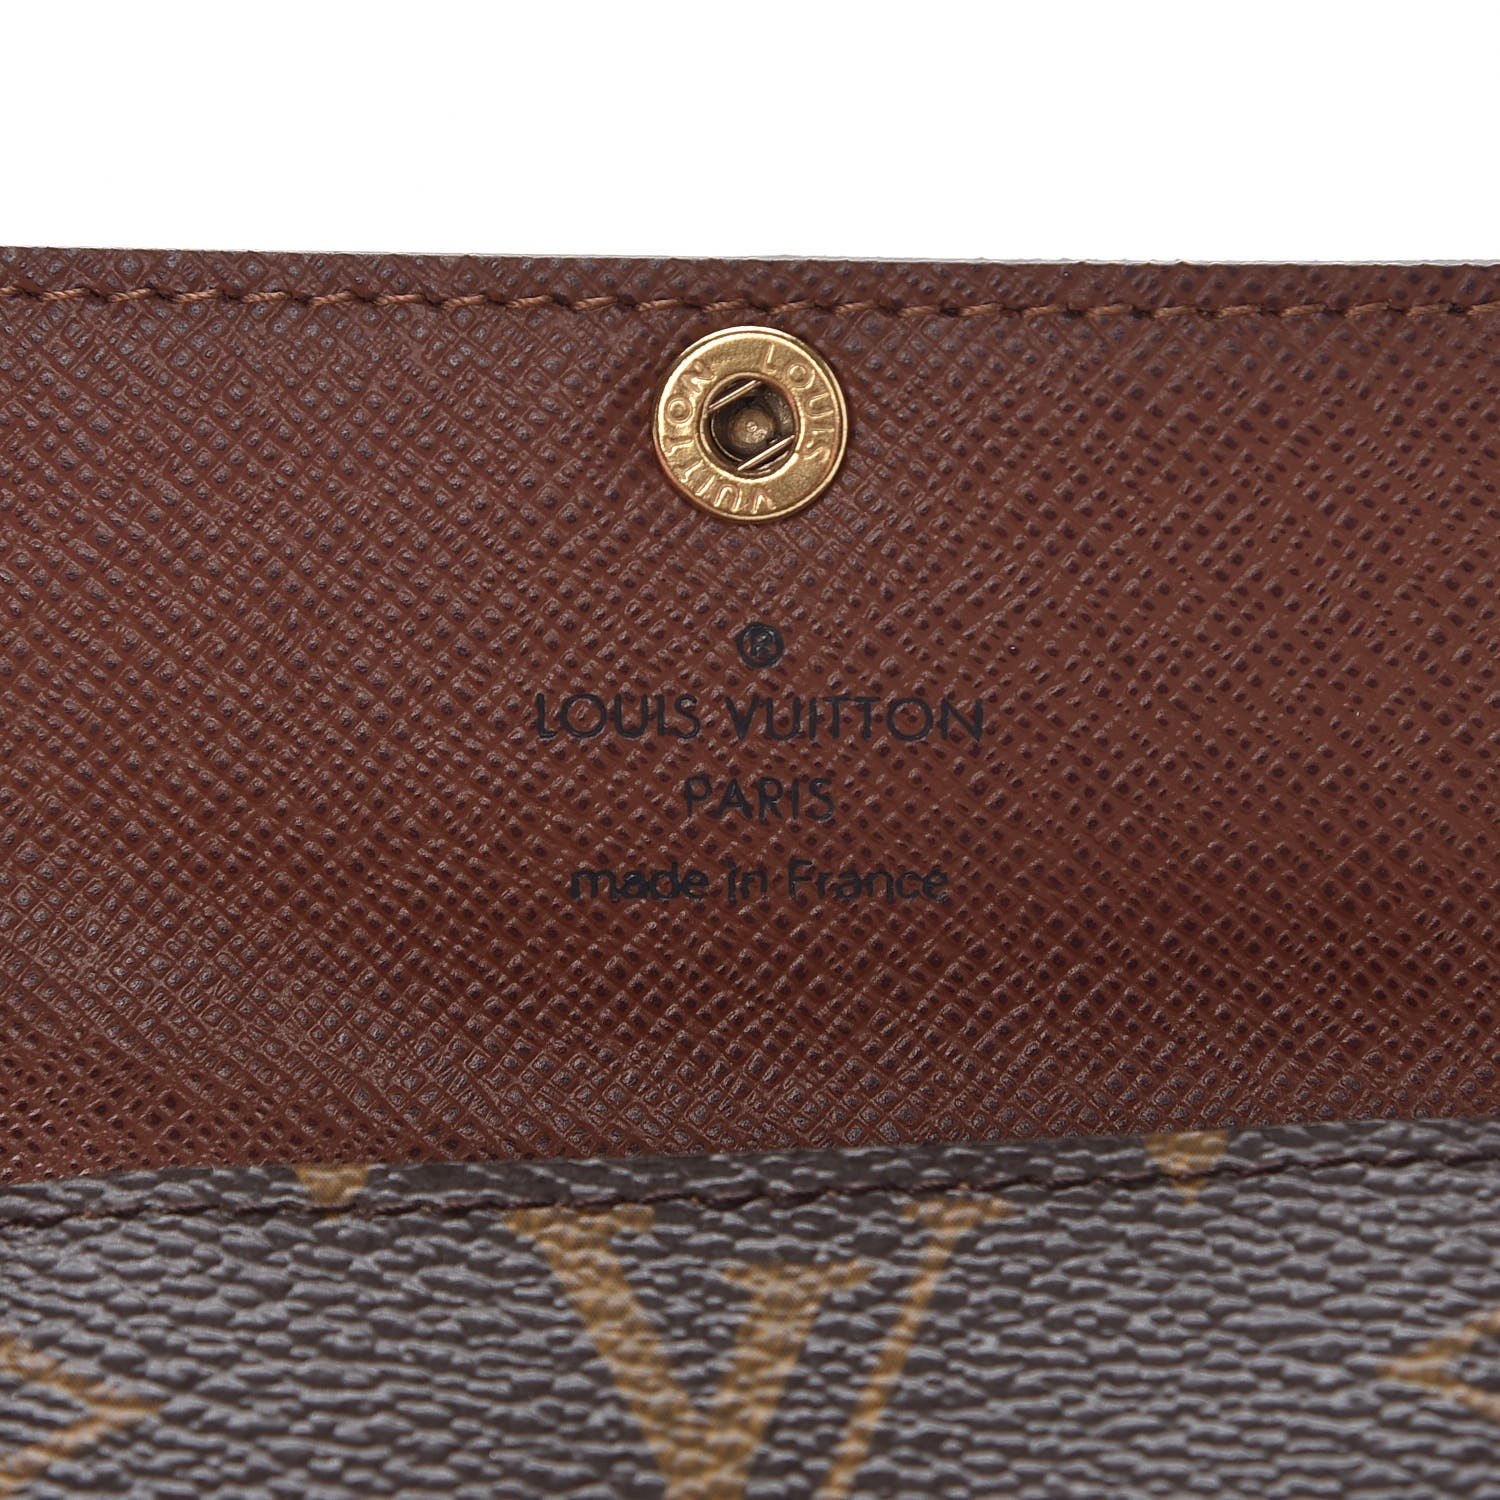 Louis Vuitton Sarah Wallet Review & Why I'm Selling It 